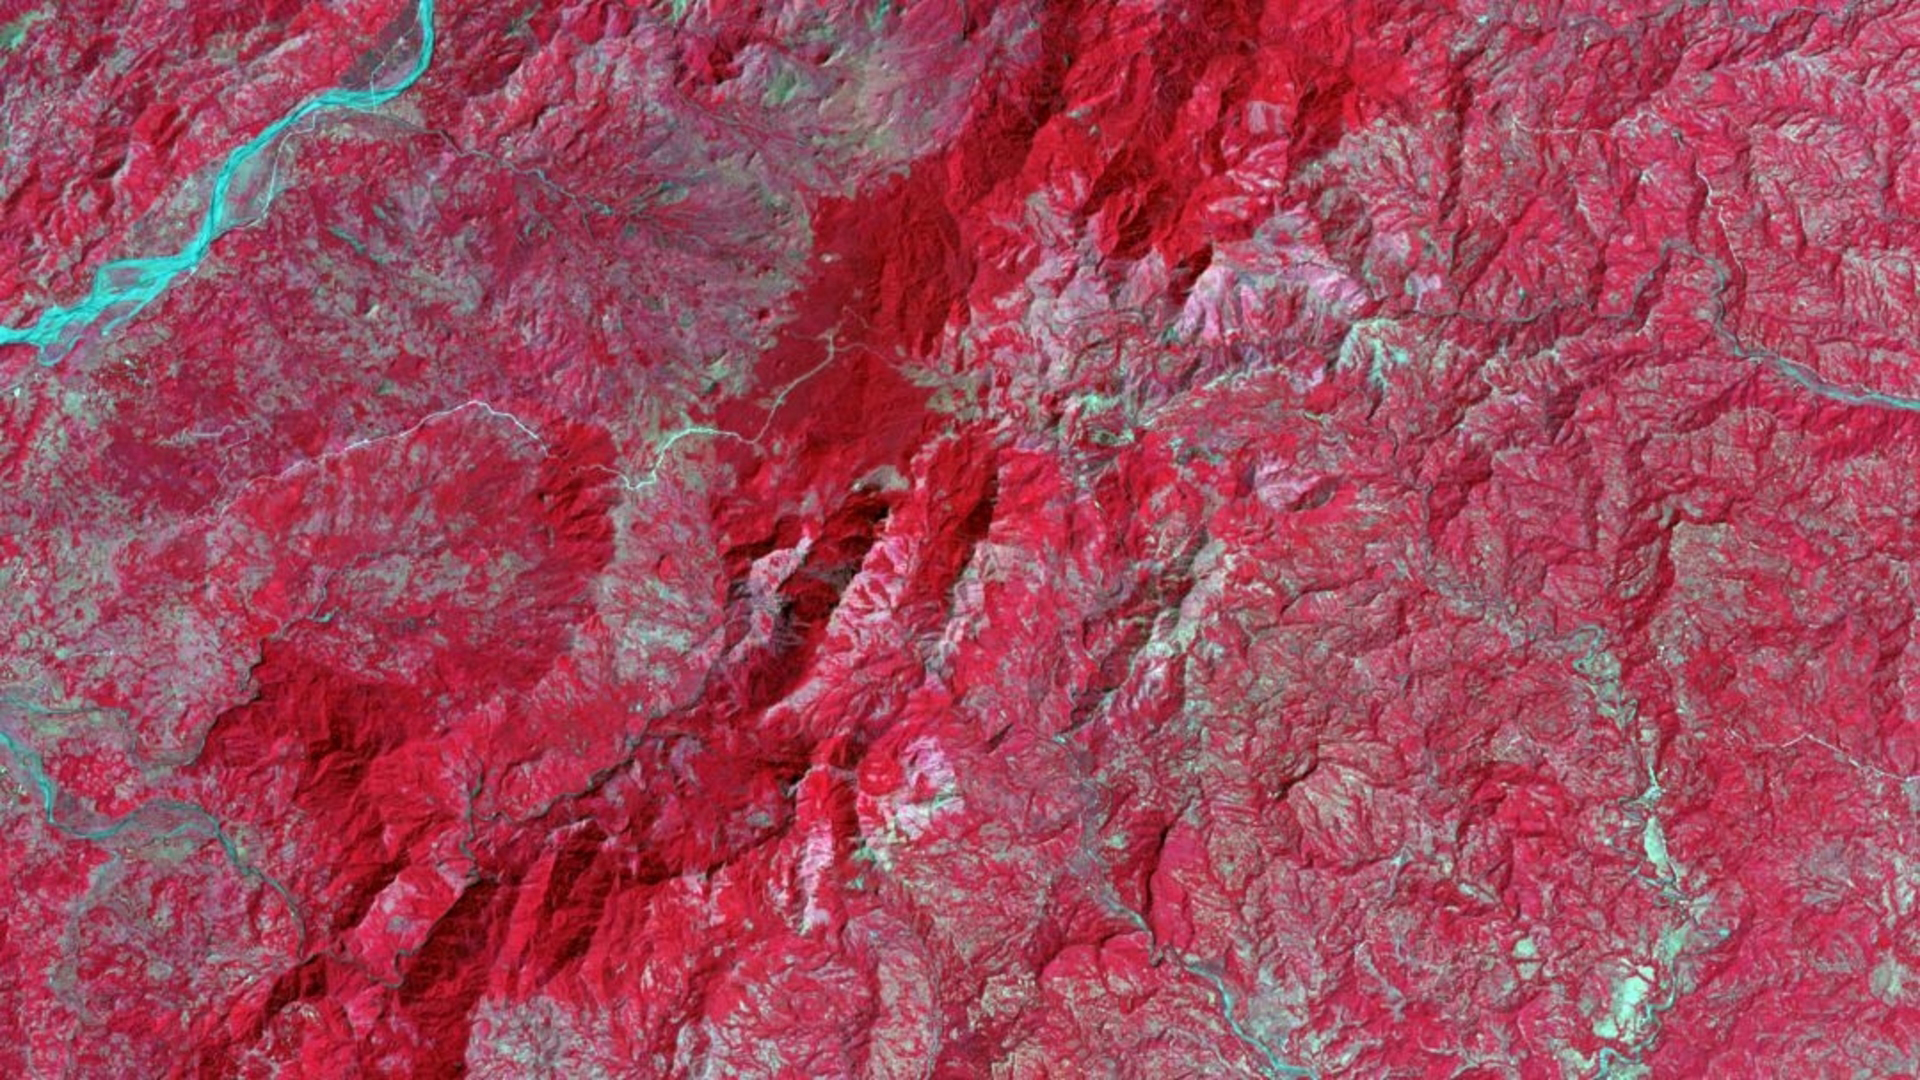 Landsat 8 Operational Land Imager multi-year composite 2017 to 2019. The false color band combination 4, 3, 2 shows land cover distinctions of Southern Panay Island in the Philippines. Primary Forest is represented by the darker red shade along the center. Lighter shades of red indicate Secondary Forest cover. Distinct shades of brighter blue characterize urban areas of the island. Displaying differences in land cover can assist with identifying favorable habitats for endemic species.Keywords: Visayan Islands Ecological Forecasting